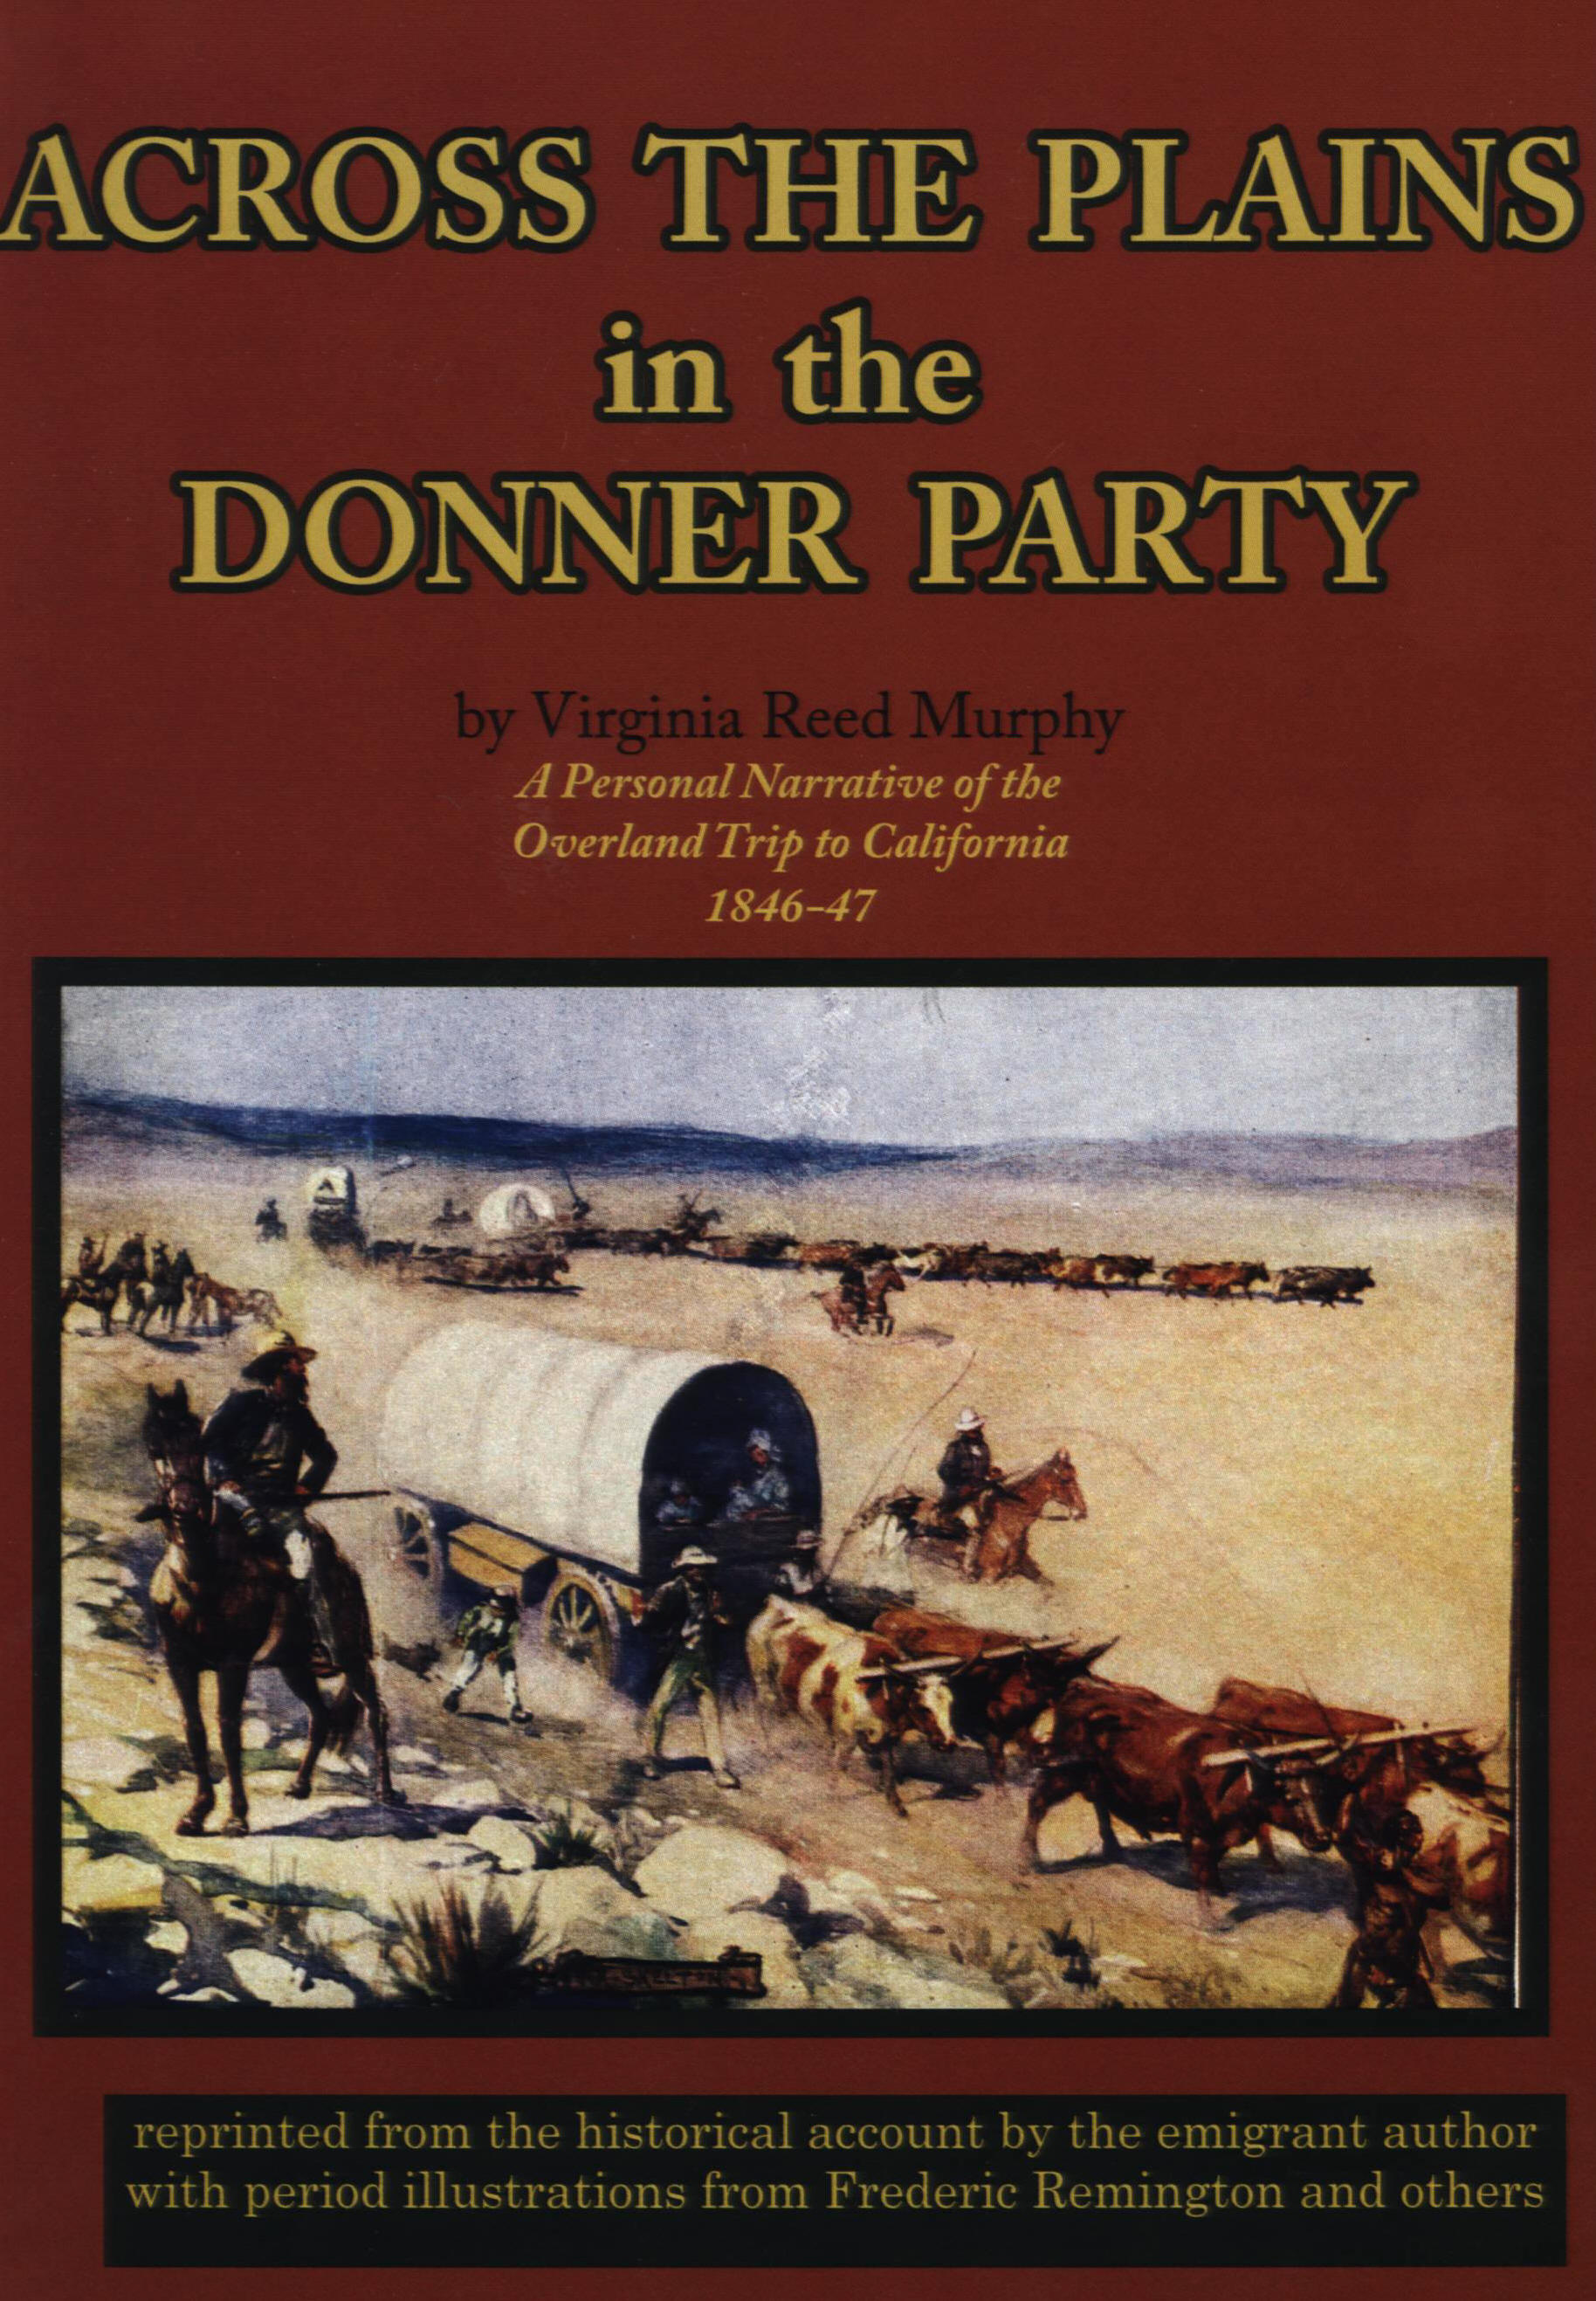 ACROSS THE PLAINS IN THE DONNER PARTY: a personal narrative of the overland trip to California, 1846-47. 